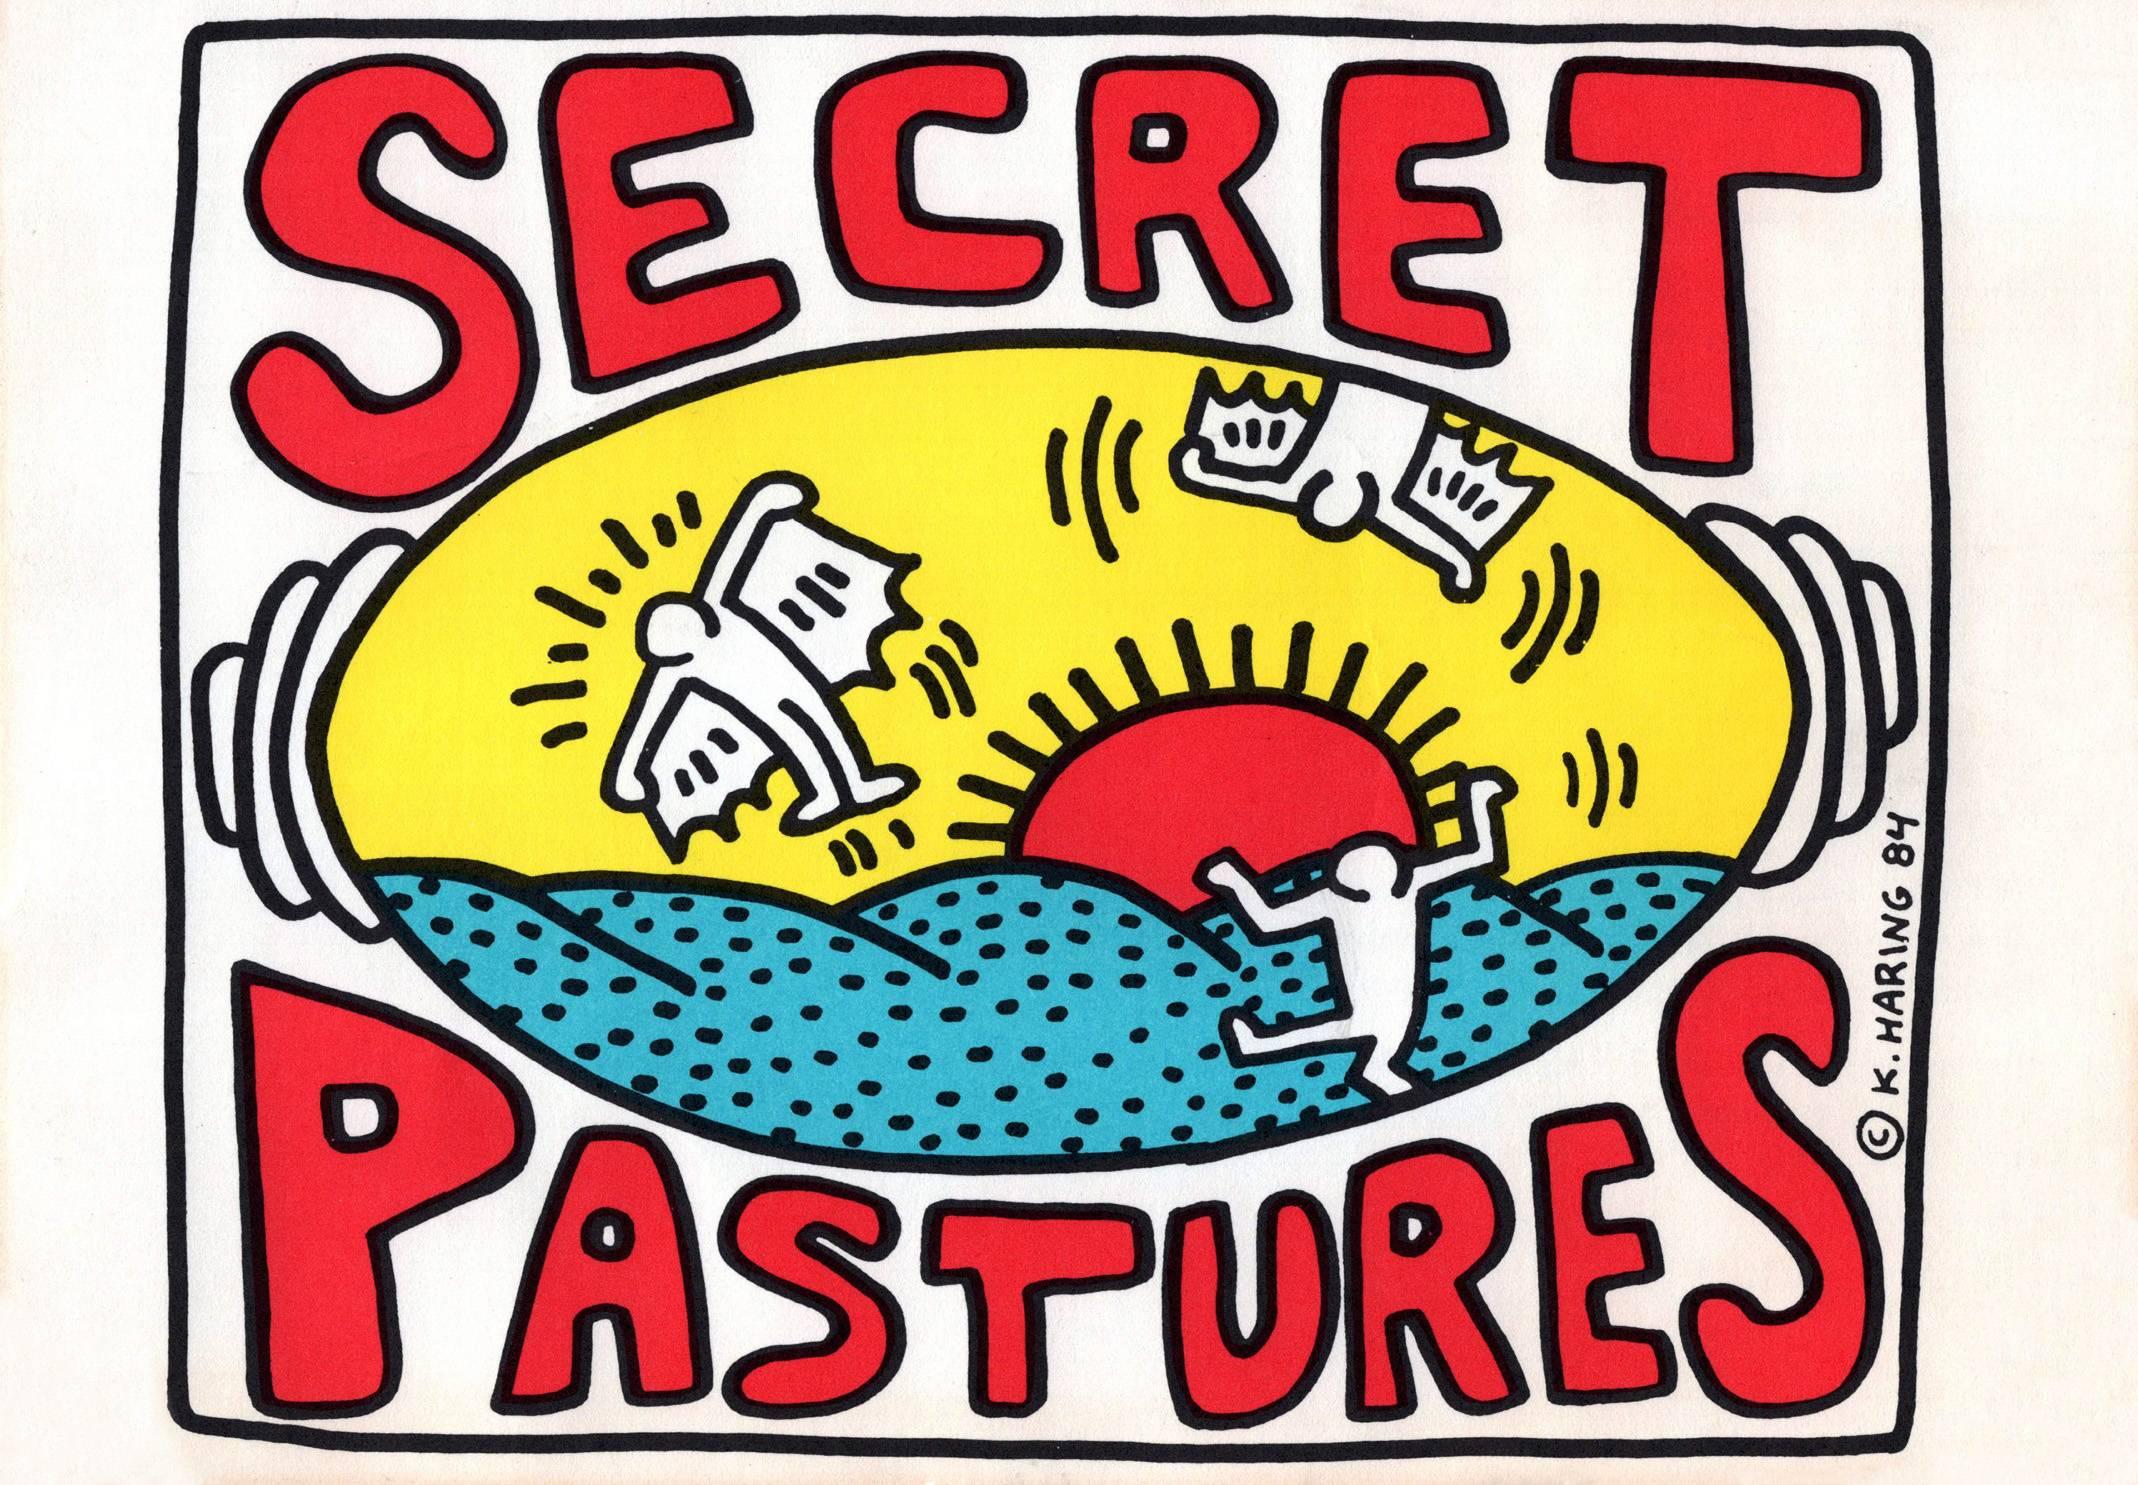 Keith Haring "Secret Pastures" 1984: 
Keith Haring illustrated 1980s oversized announcement card for the historic, "Secret Pastures" show at The Brooklyn Academy of music in 1984. 

Off-set printed announcement. 6 x 8.5 inches.
Some minor signs of